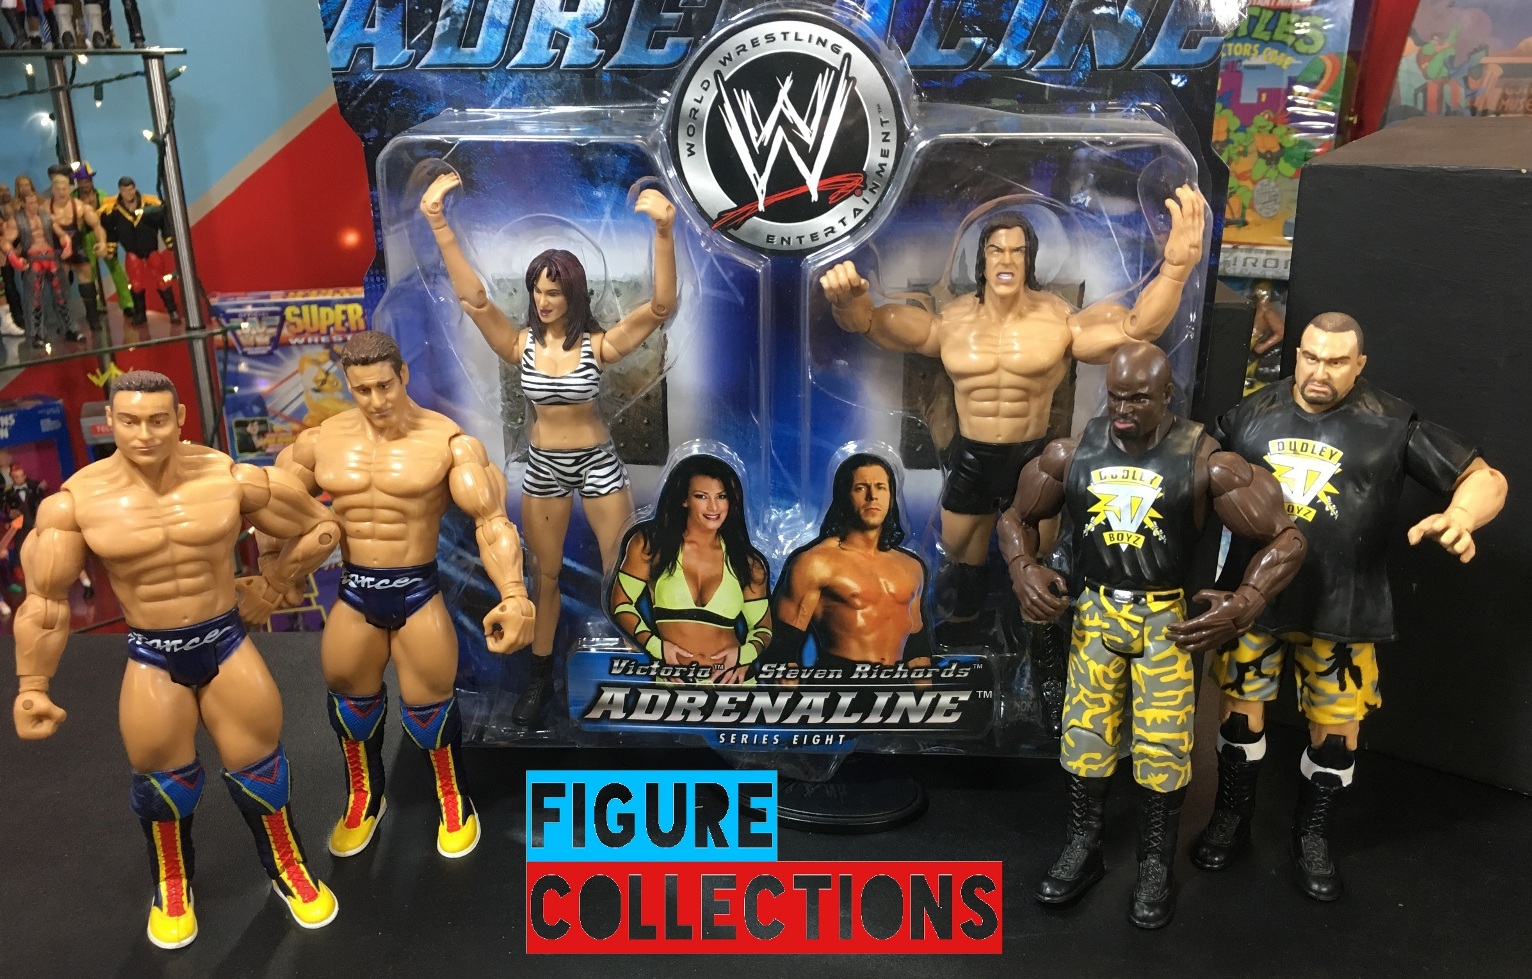 WWE Wrestling Jakks Ruthless Aggression Adrenaline Series 8 Stevie Richards Victoria La Resistance Rob Conway Rene Dupree Dudley Boys Team 3D Dudleys Bubba Ray D-Von Dudley Figures Complete Set MOC